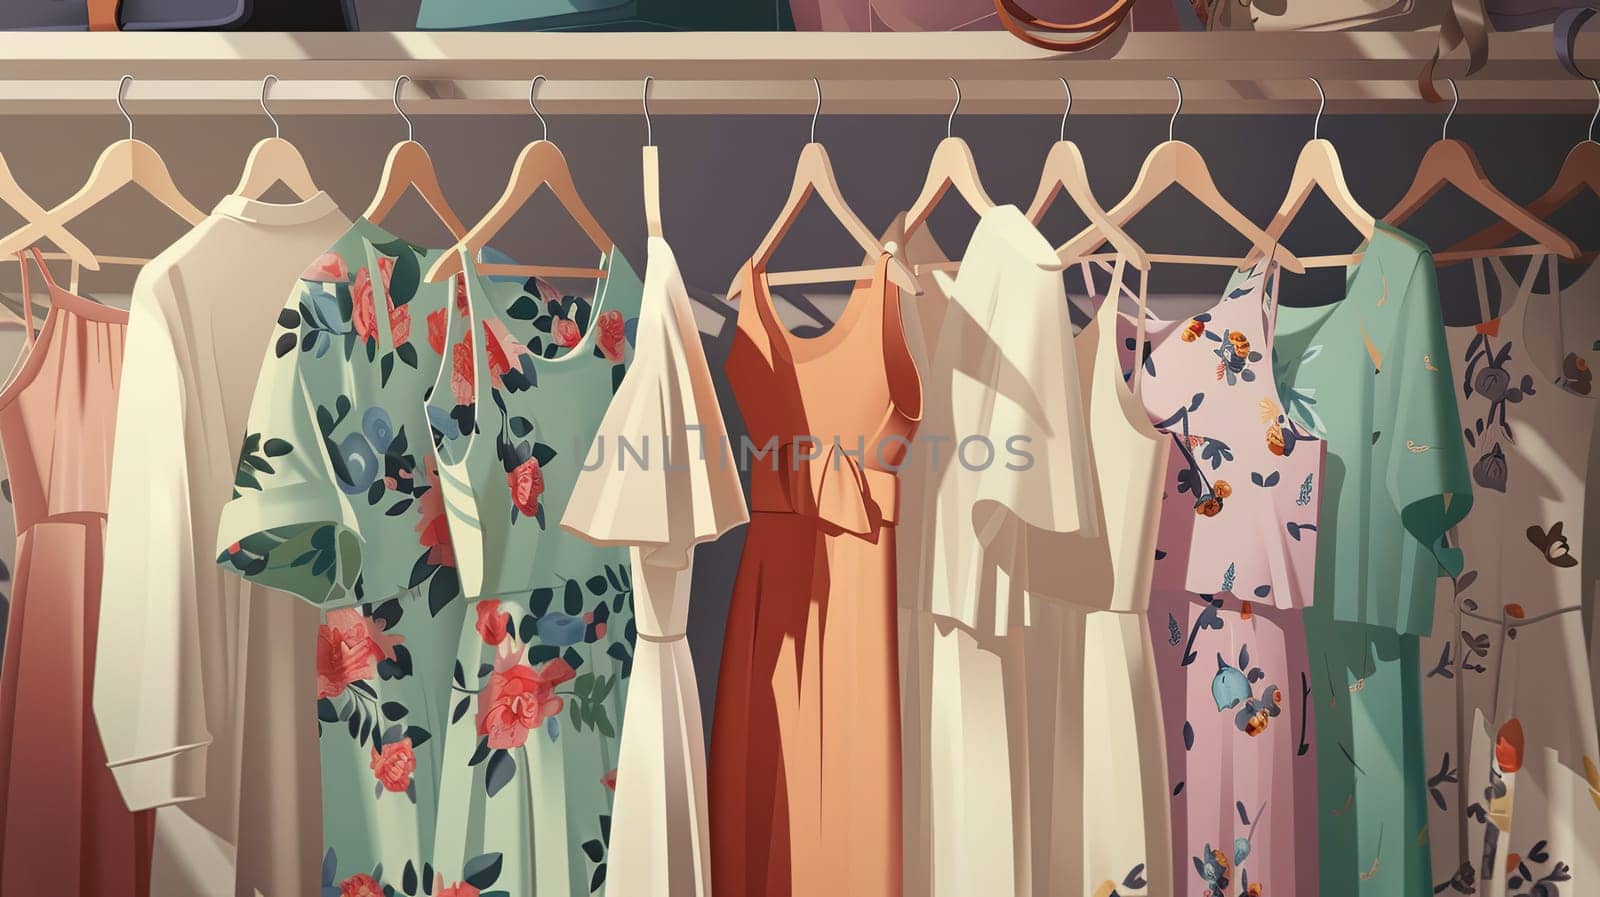 Various dresses of different styles and colors hanging on a rack in a fashion store.